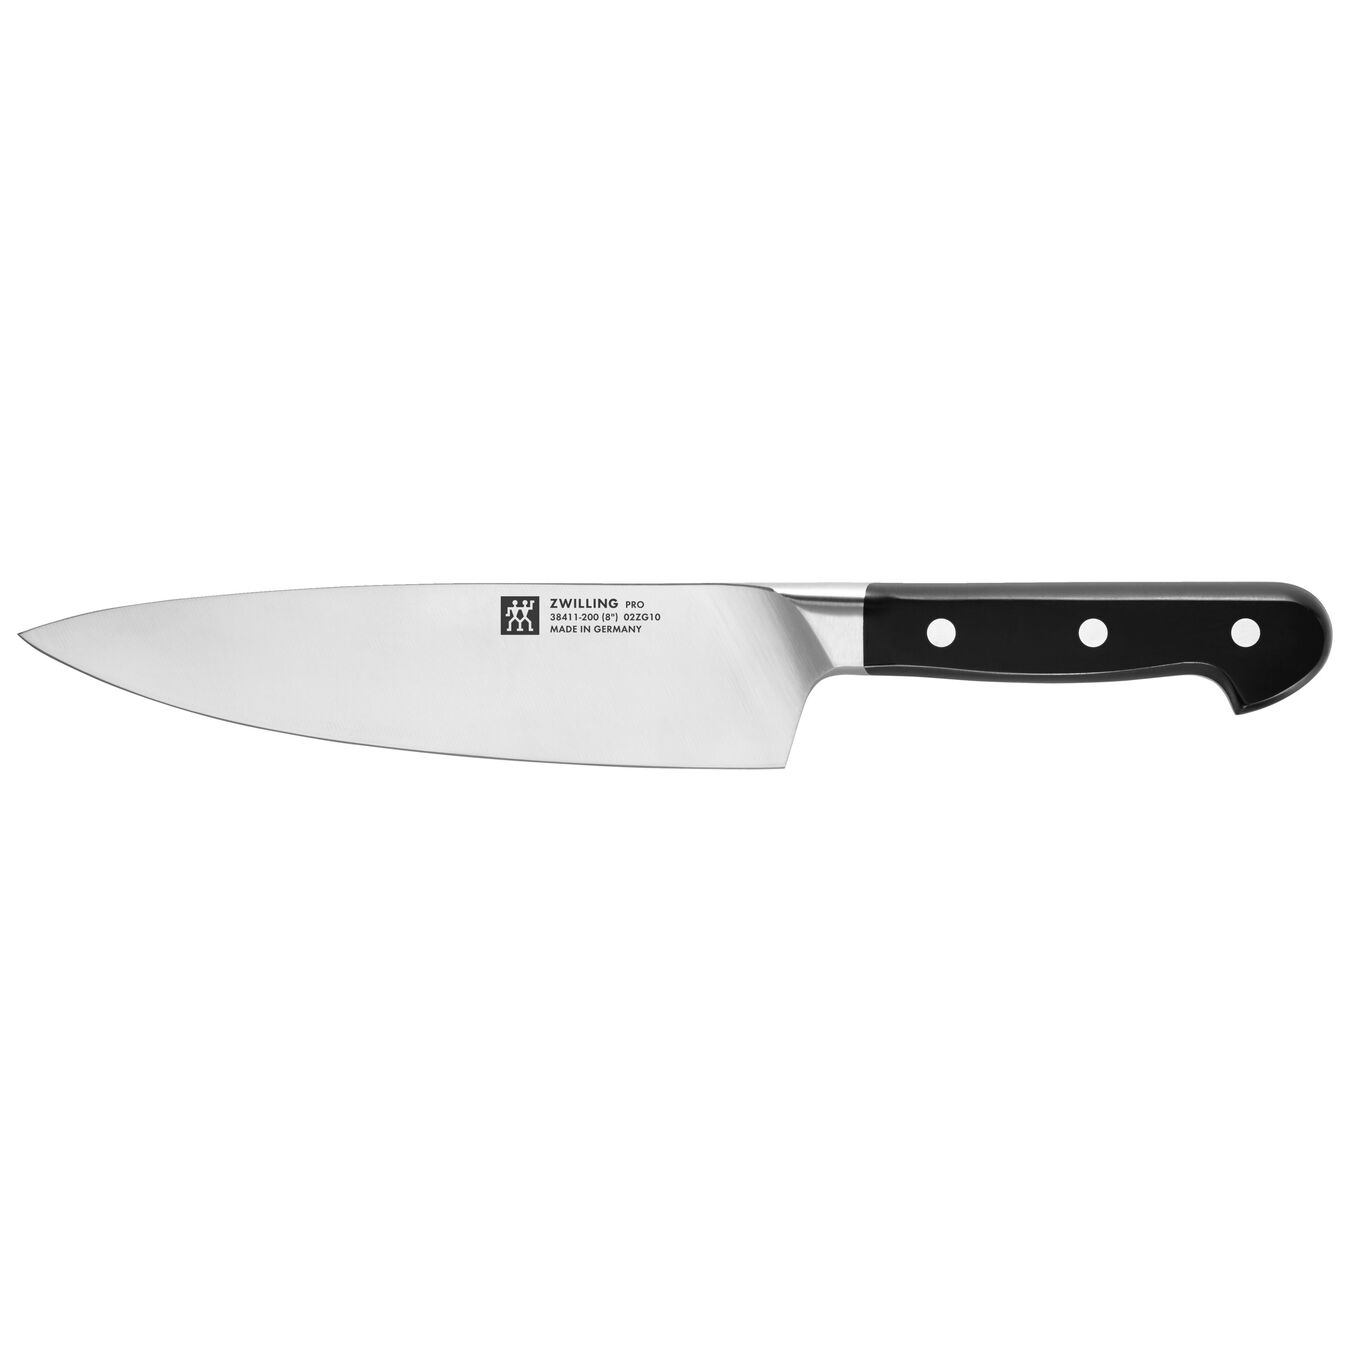 8-inch, Traditional Chef's Knife,,large 1